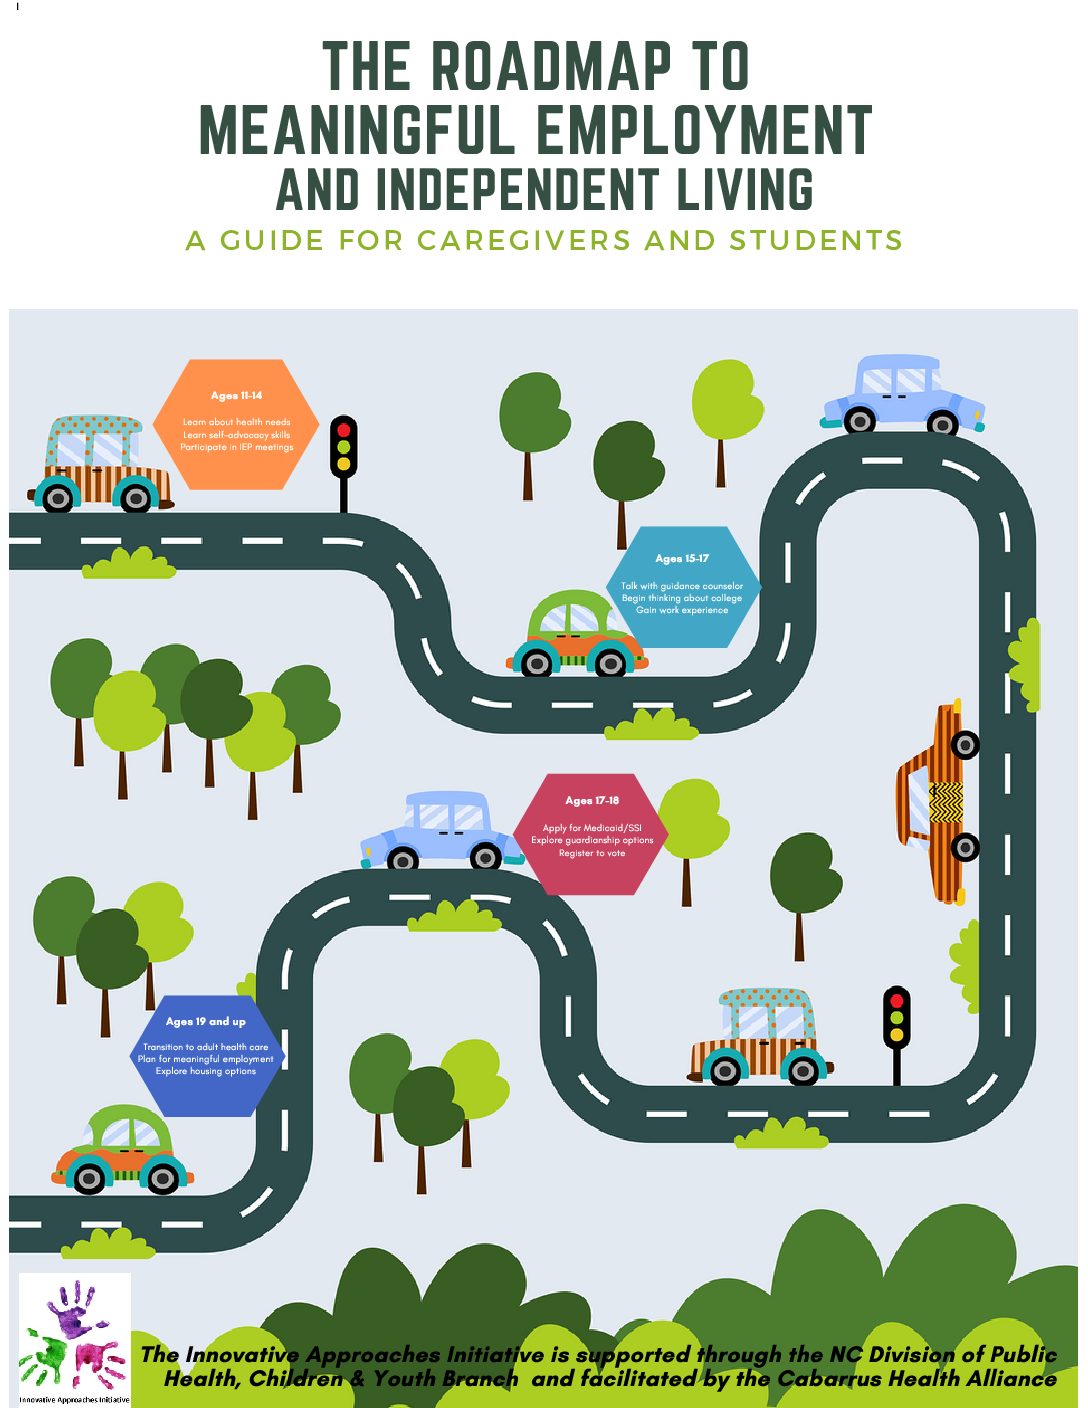 The Roadmap to Meaningful Employment and Independent Living